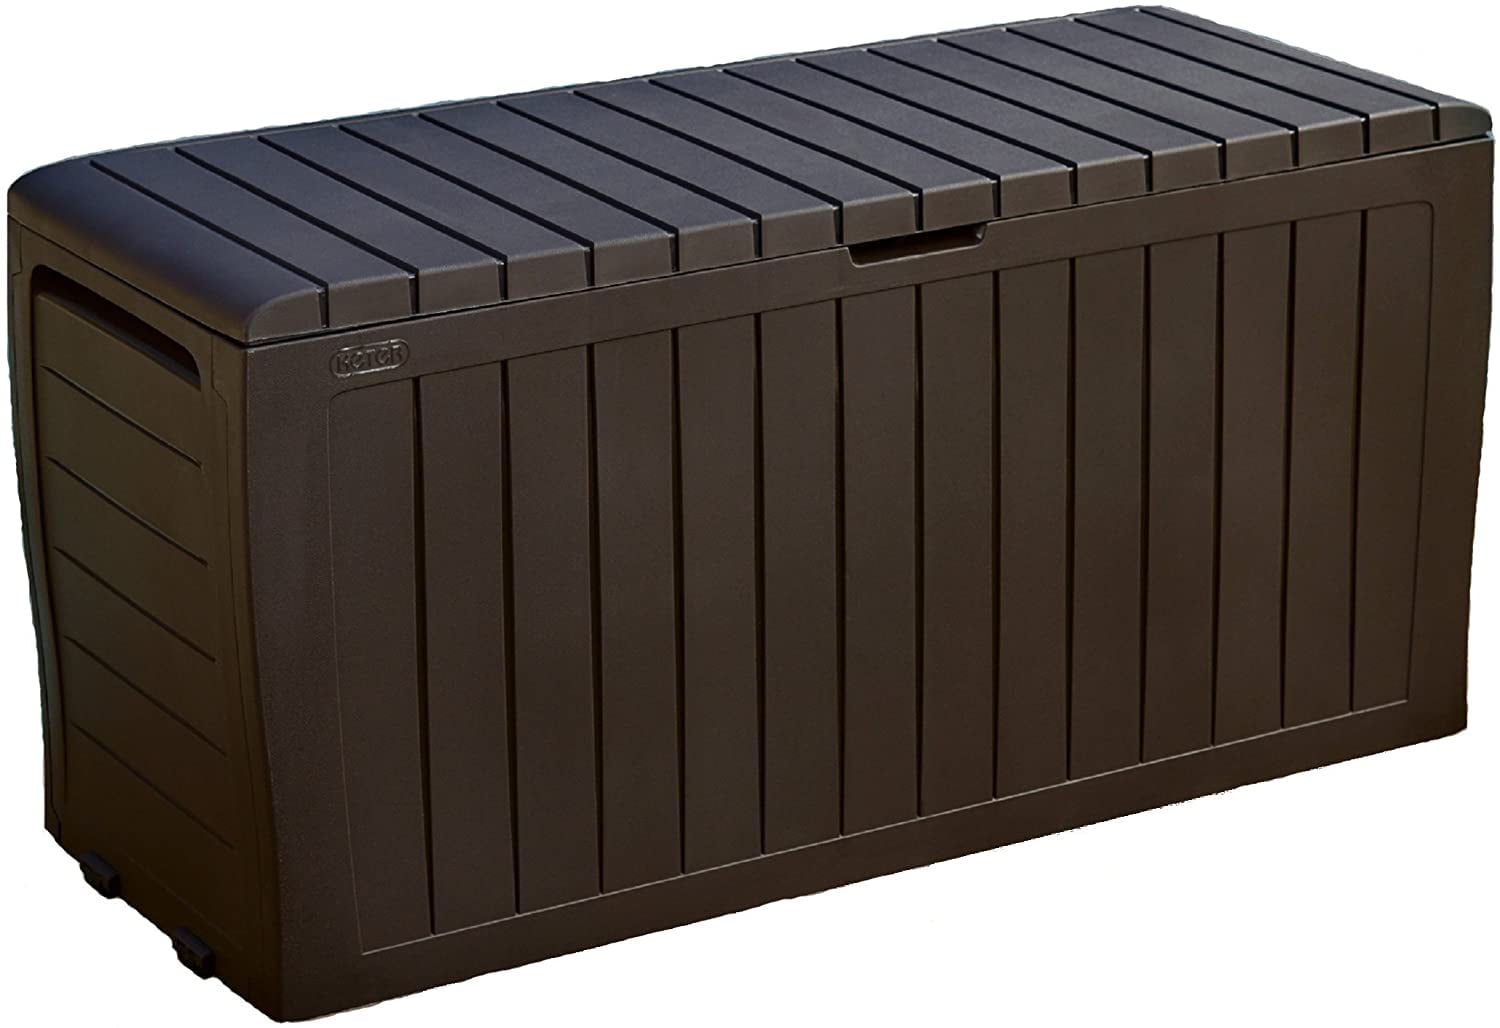 Keter Marvel Plus 71 Gallon Resin Outdoor Storage Box for